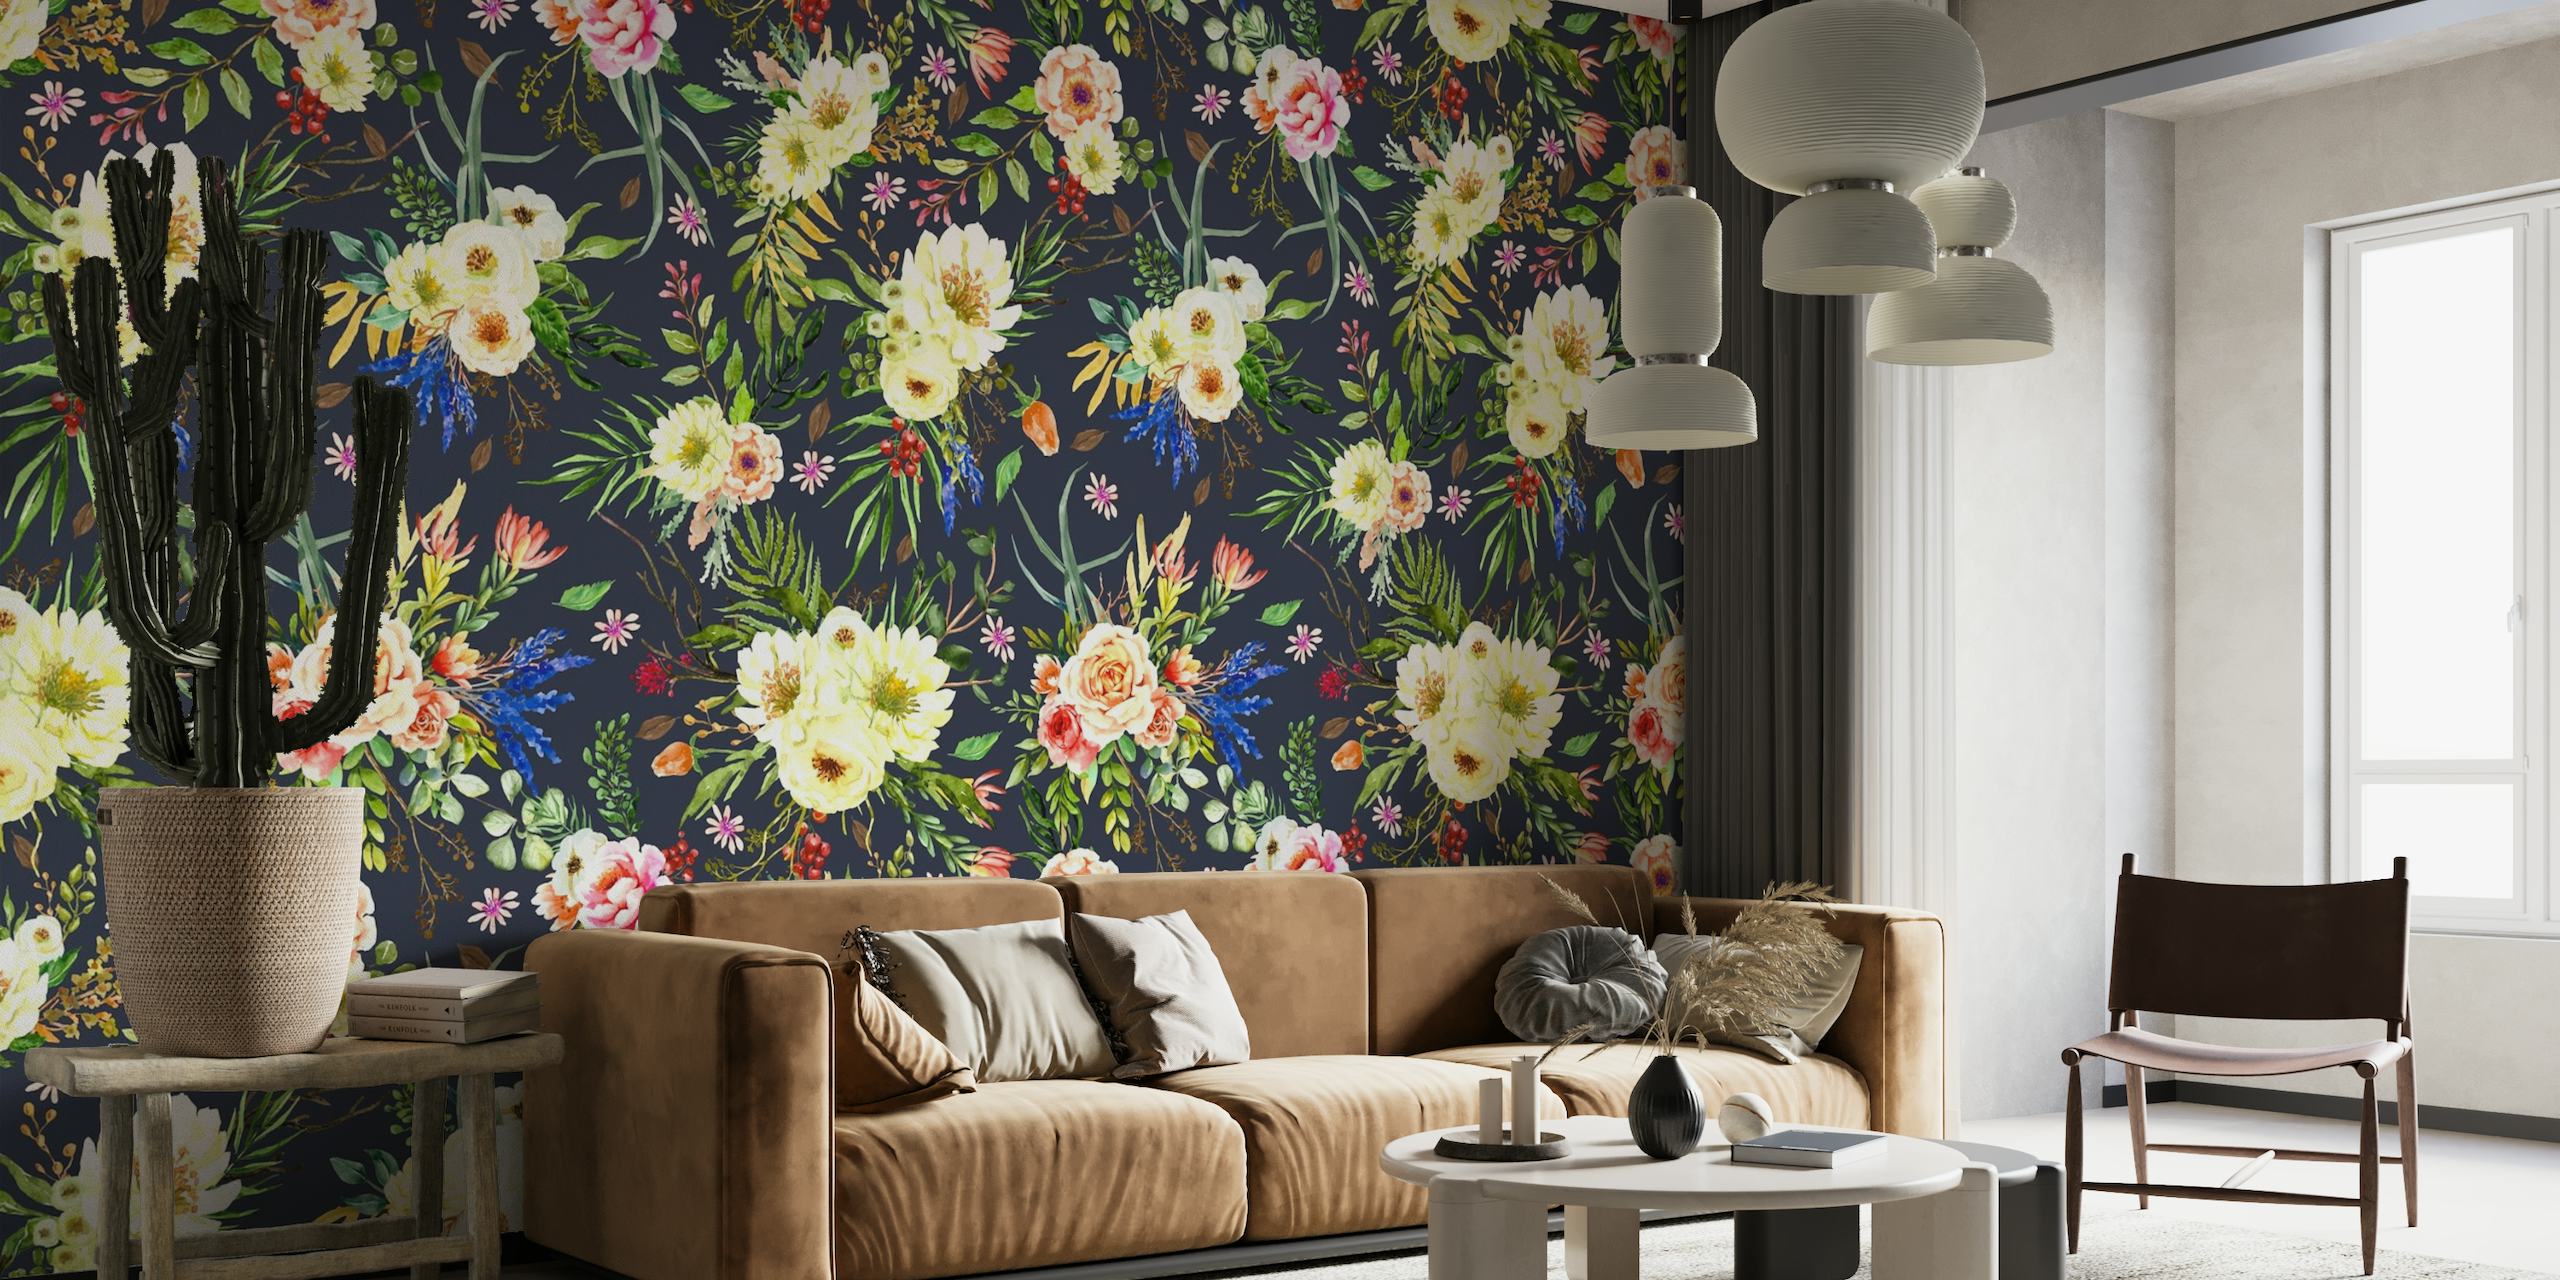 Darkness Wild Flower Bouquets wall mural with various colorful flowers on a dark background